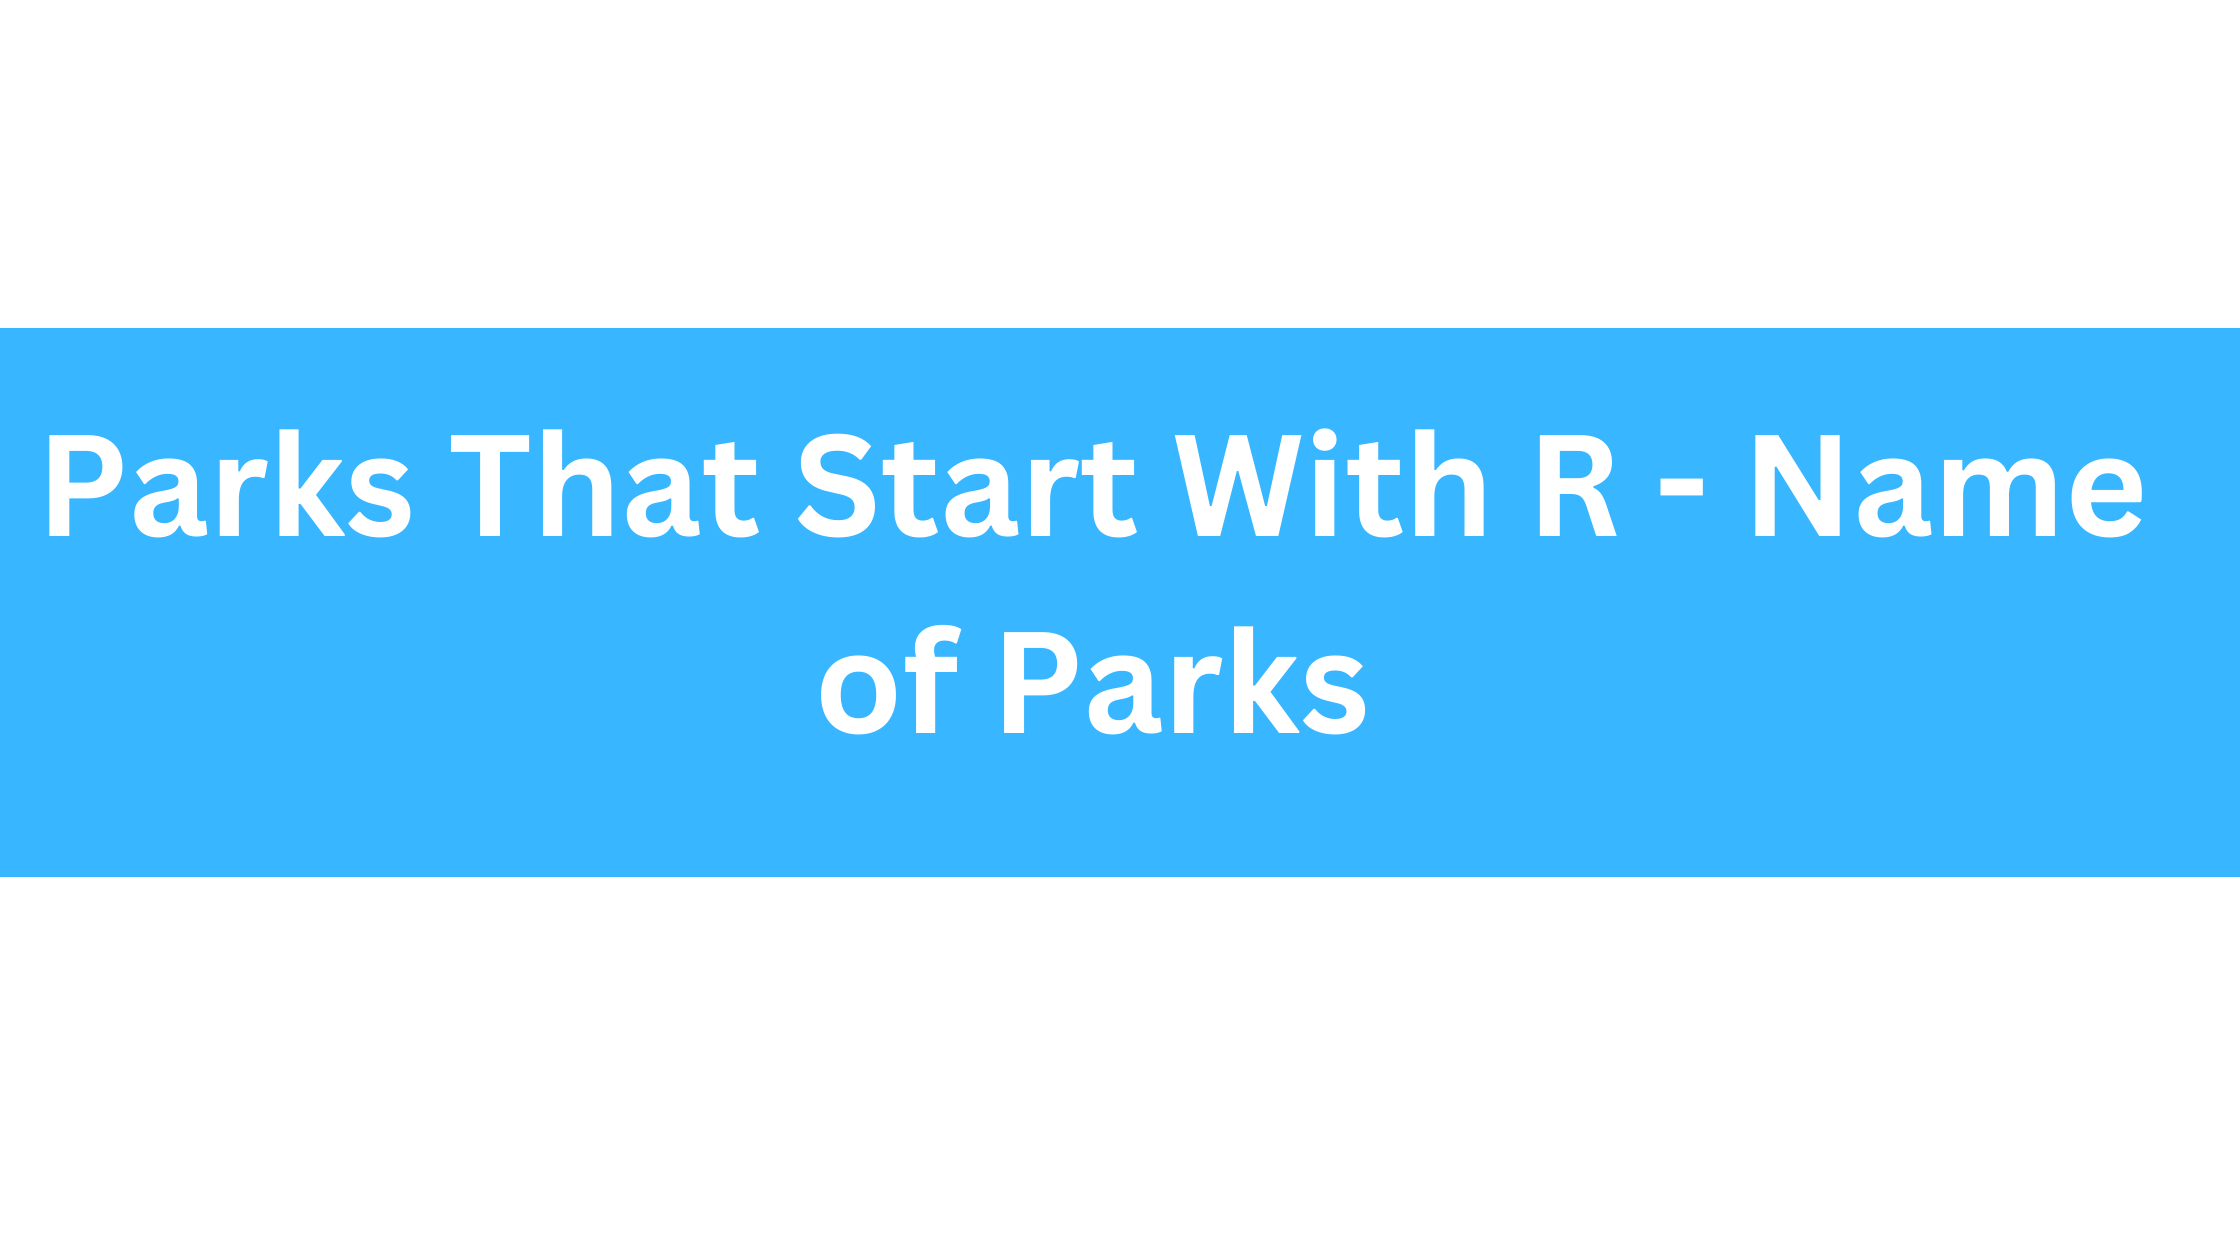 Parks That Start With R